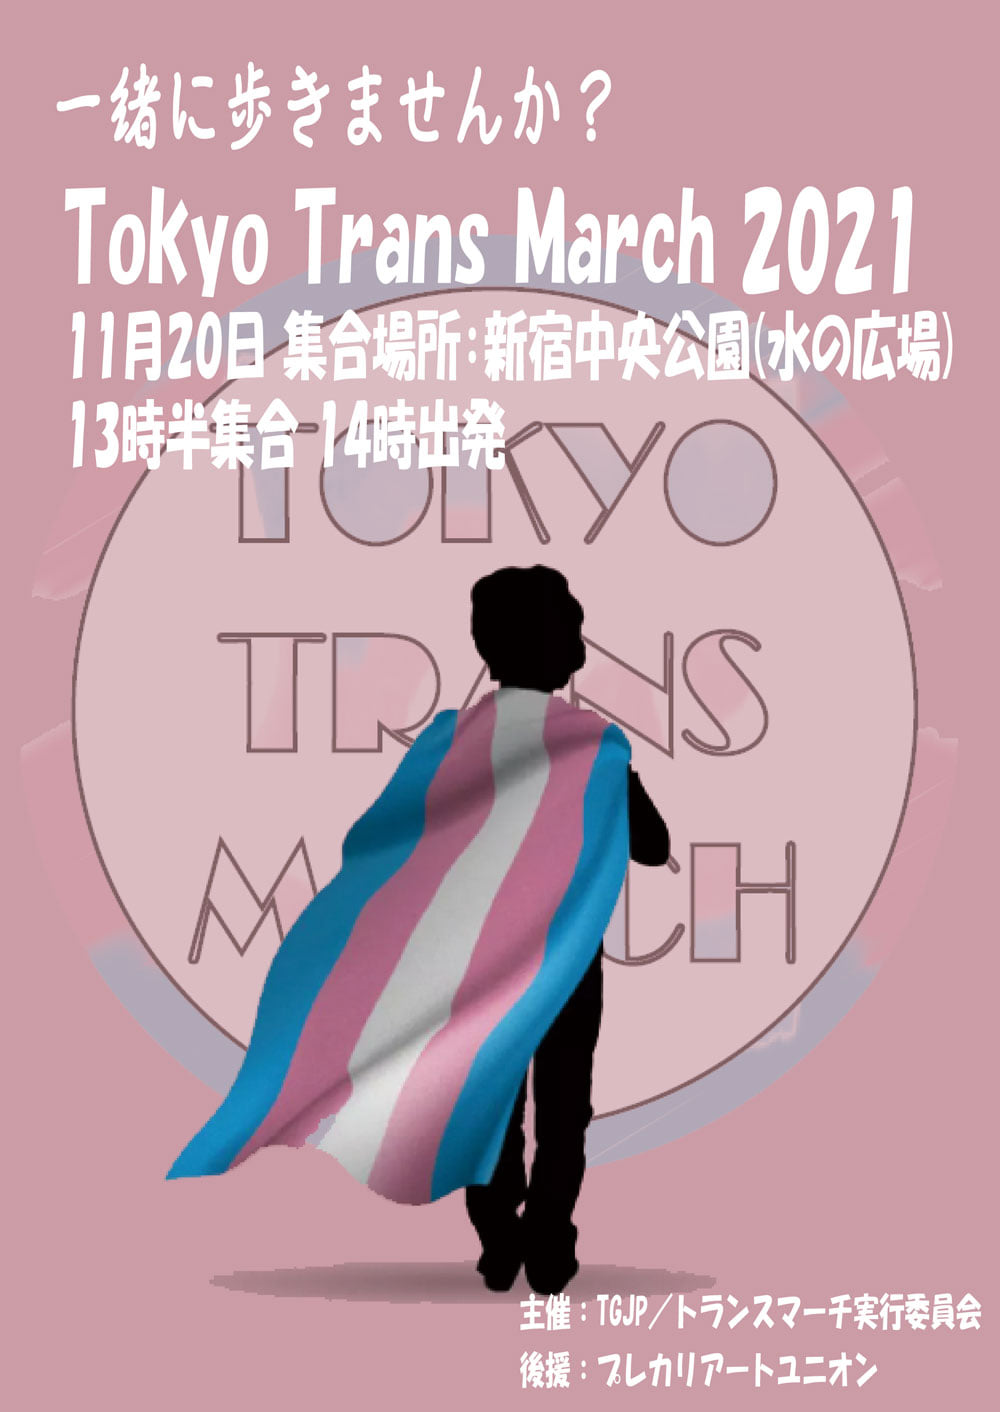 Tokyo to mark its first Trans March Nov 20